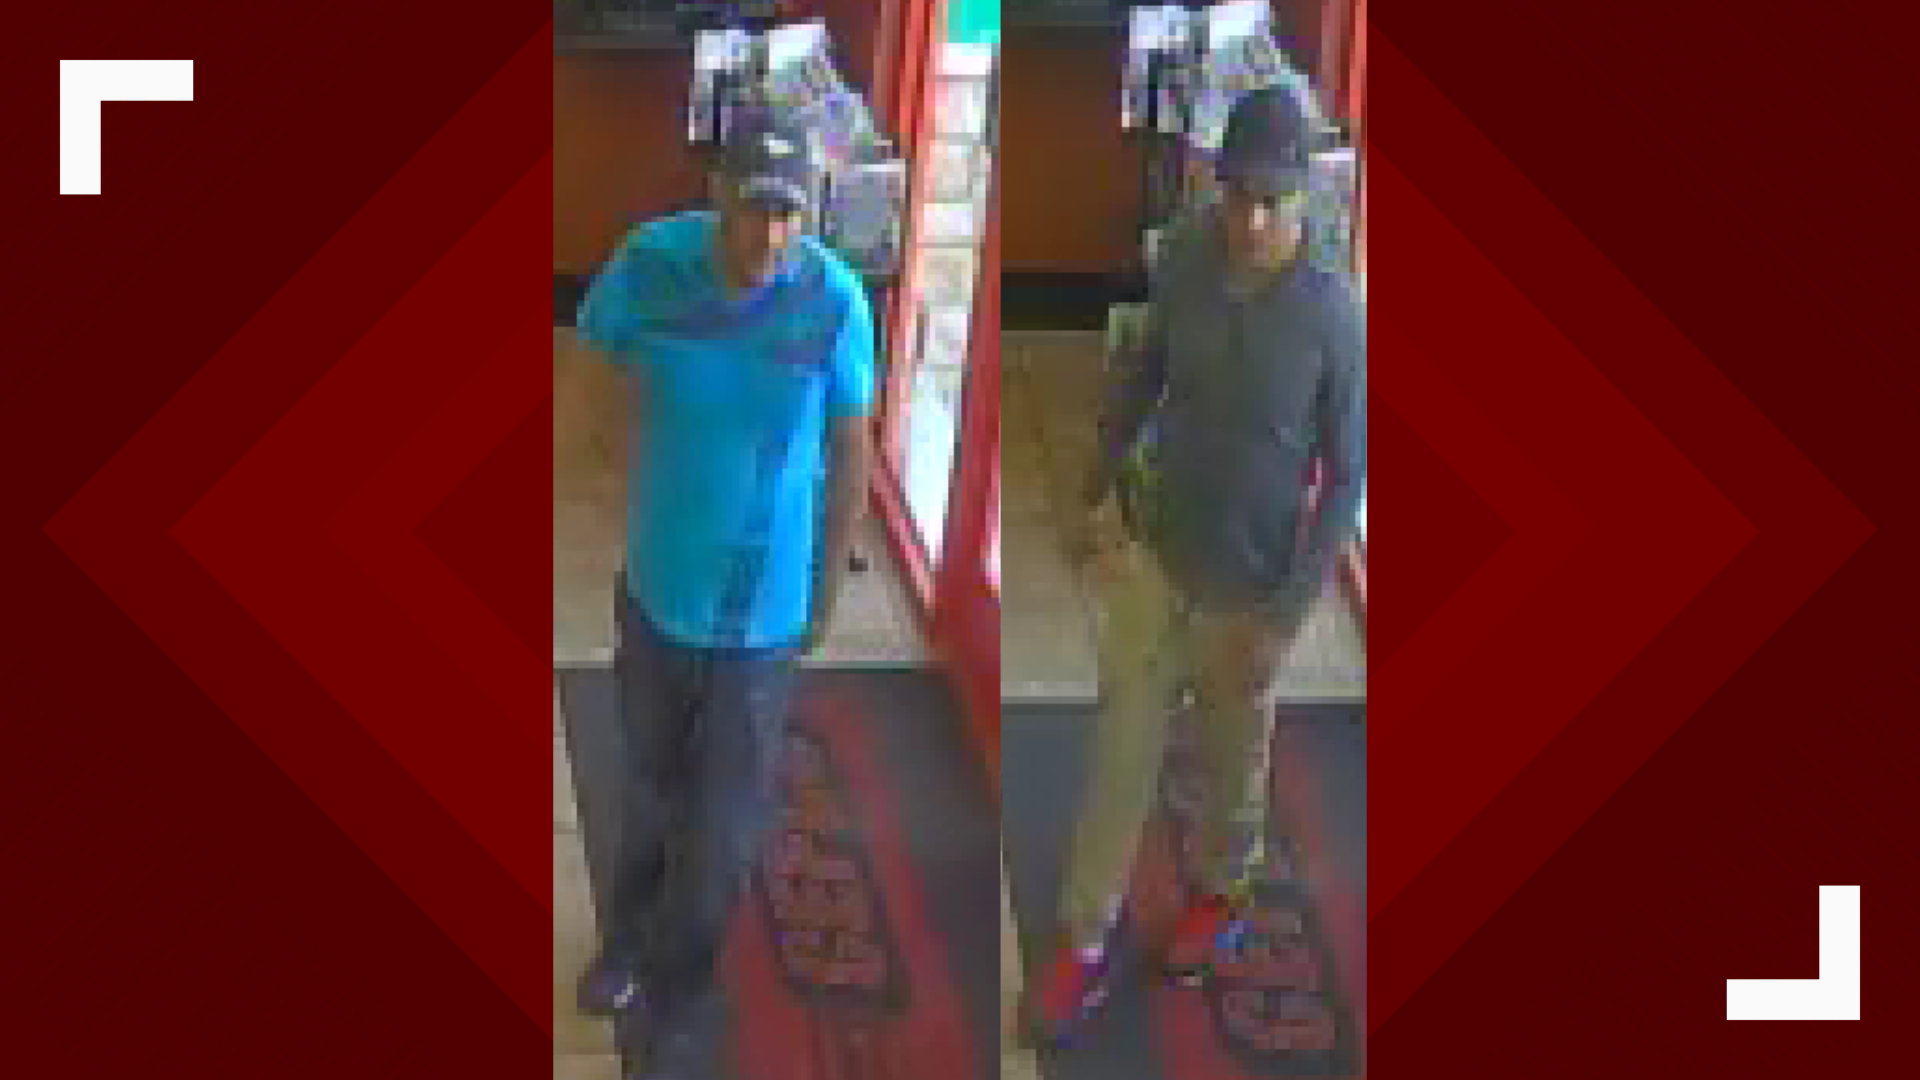 Harker Heights police are looking for two men accused of using stolen credit card information at multiple locations.